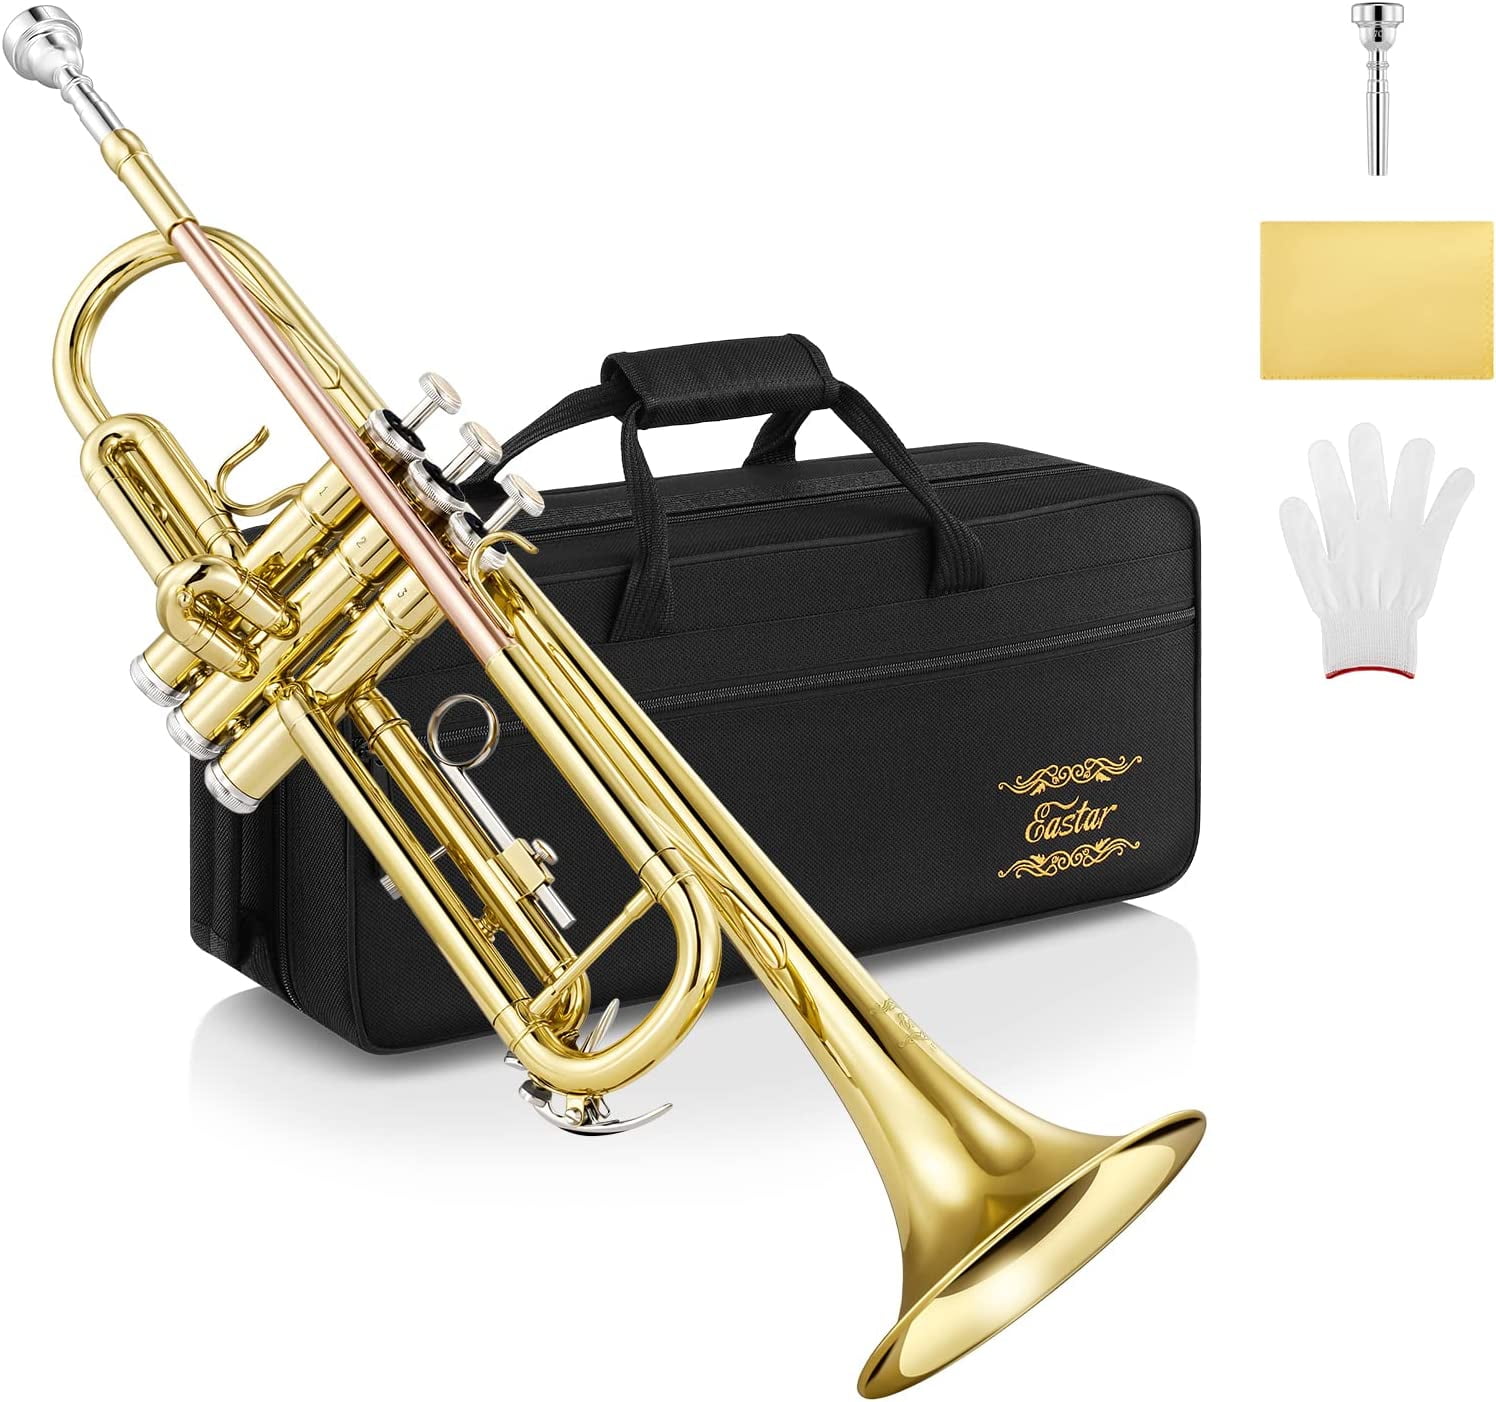 Professional Plastic Bb and Beginner Trumpet With Trumpet Mouthpiece  Trumpet Mouthpiece, 7C Student Mute Standard for 3C Silencer Trumpet Set  with Bb